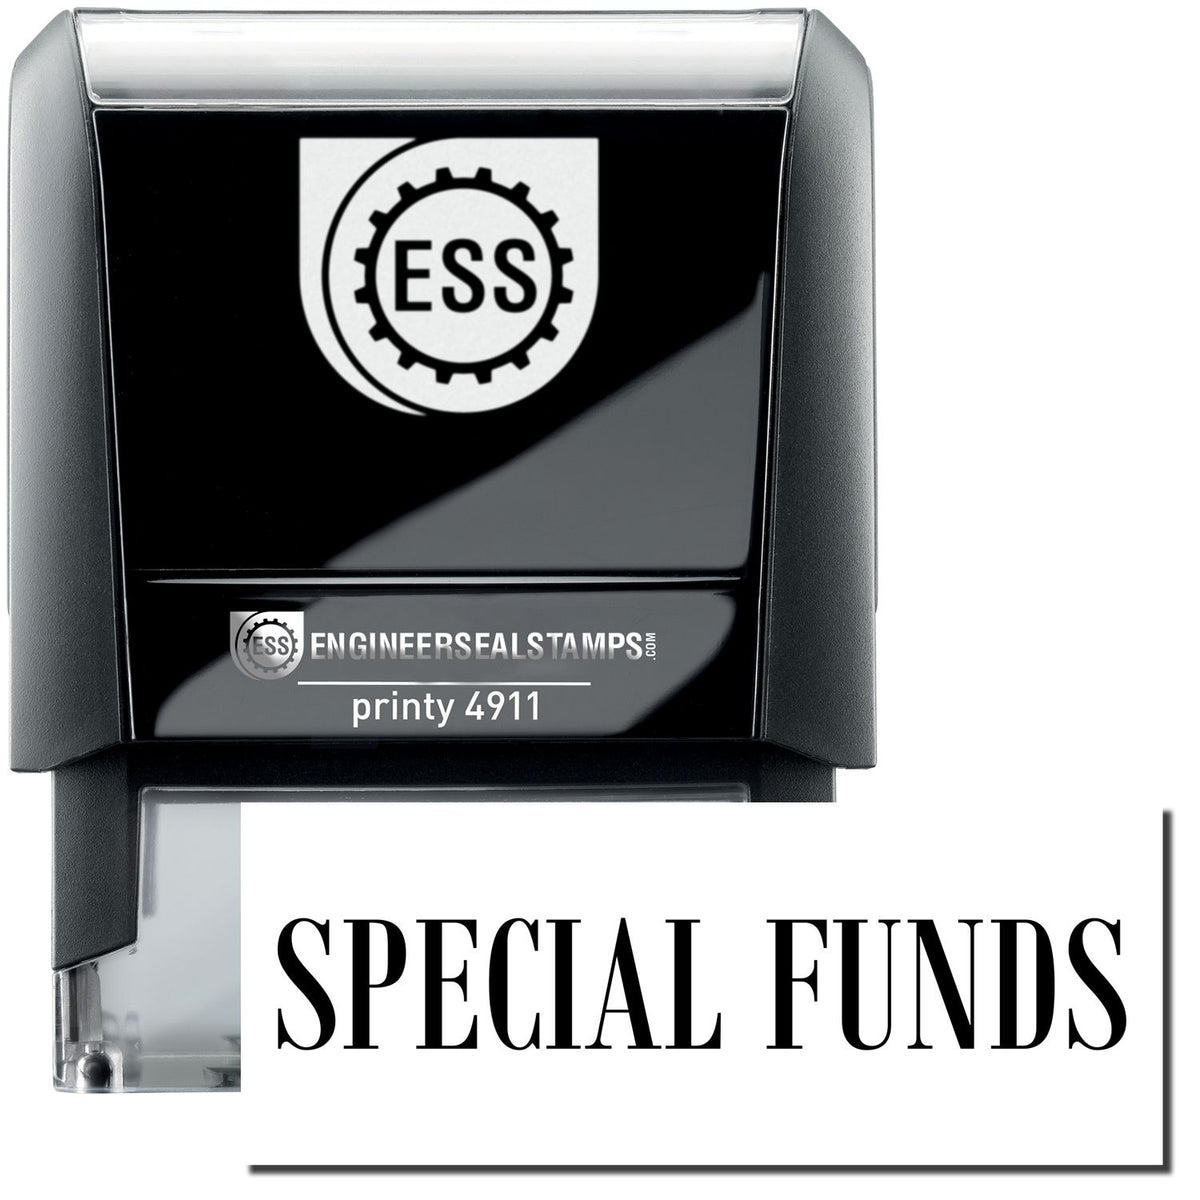 A self-inking stamp with a stamped image showing how the text &quot;SPECIAL FUNDS&quot; is displayed after stamping.